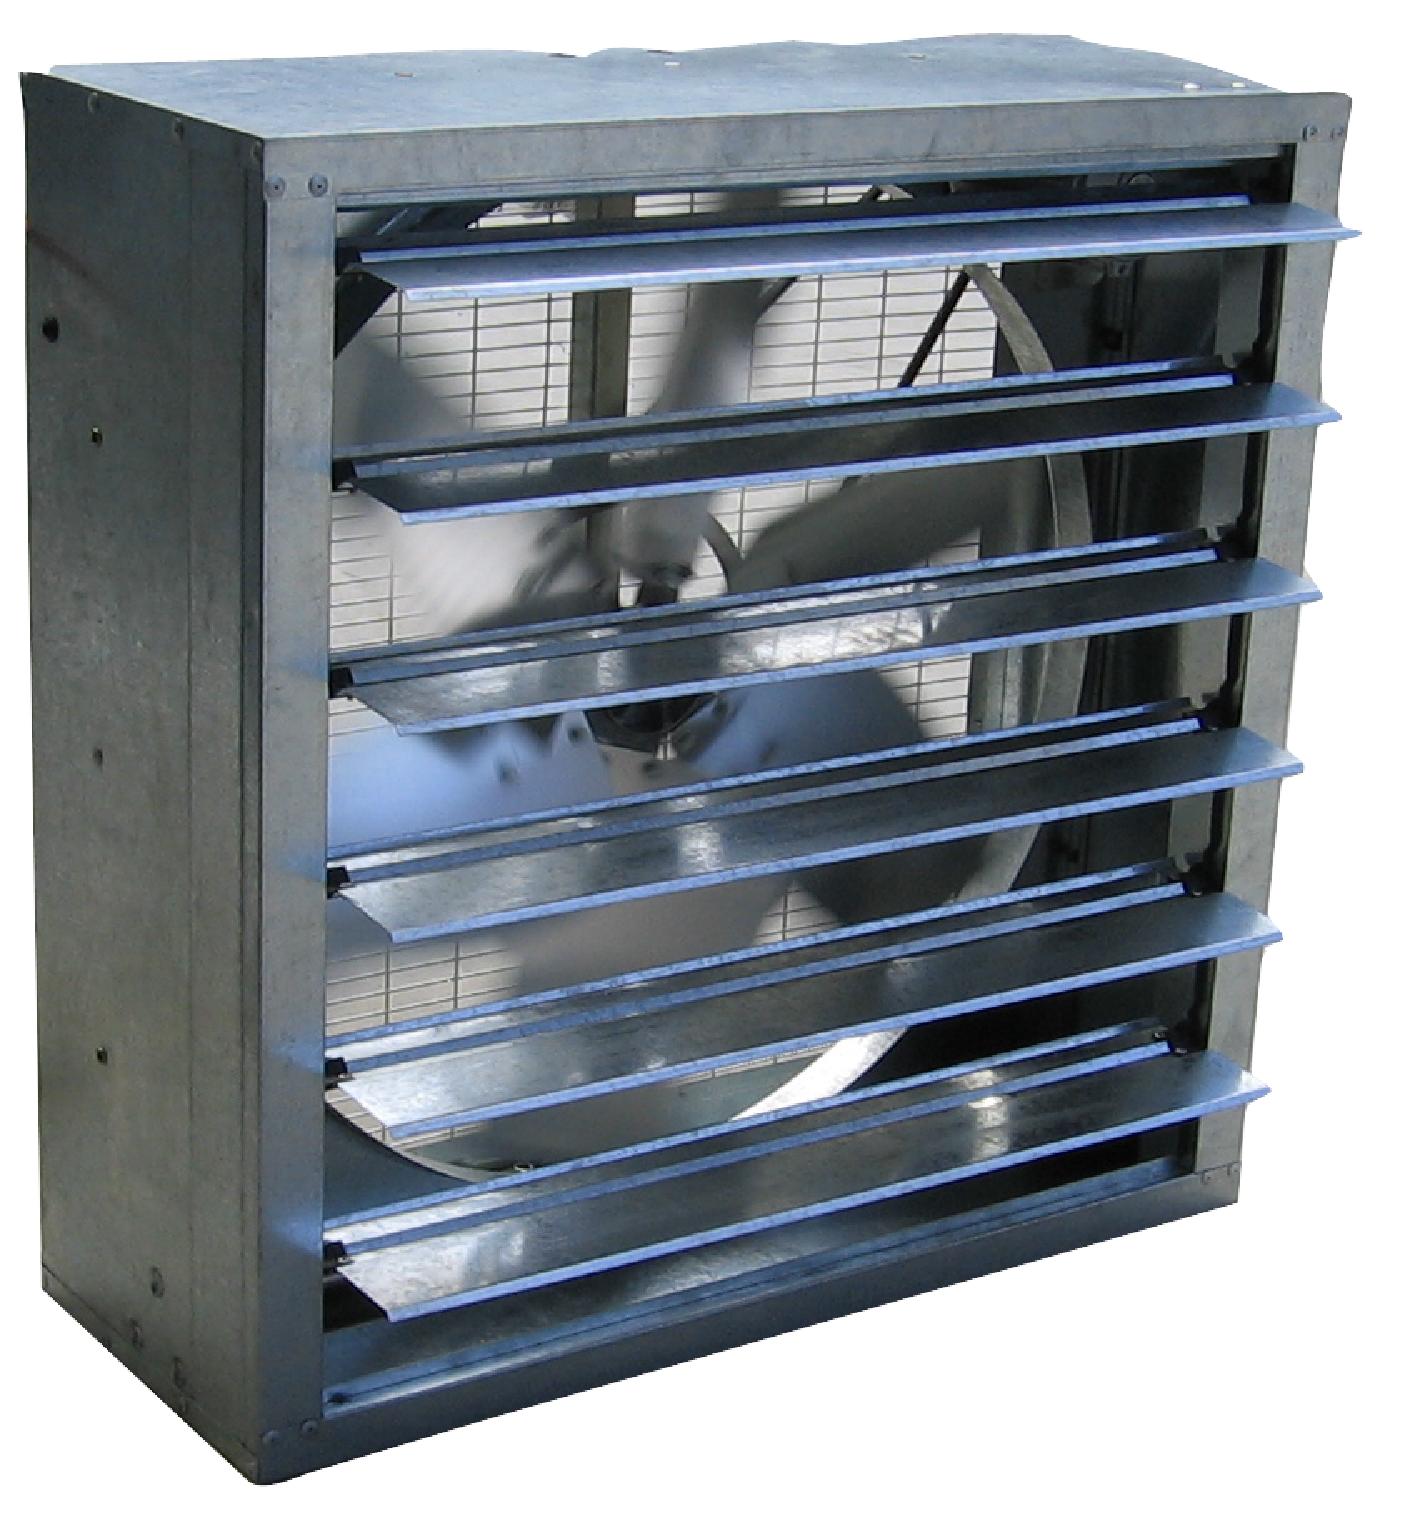 INDUST GAL LOUVERED FAN 950MM / Industrial Heating Cooling Ventilation Distribution Fans Warehouse Australia / Fanmaster